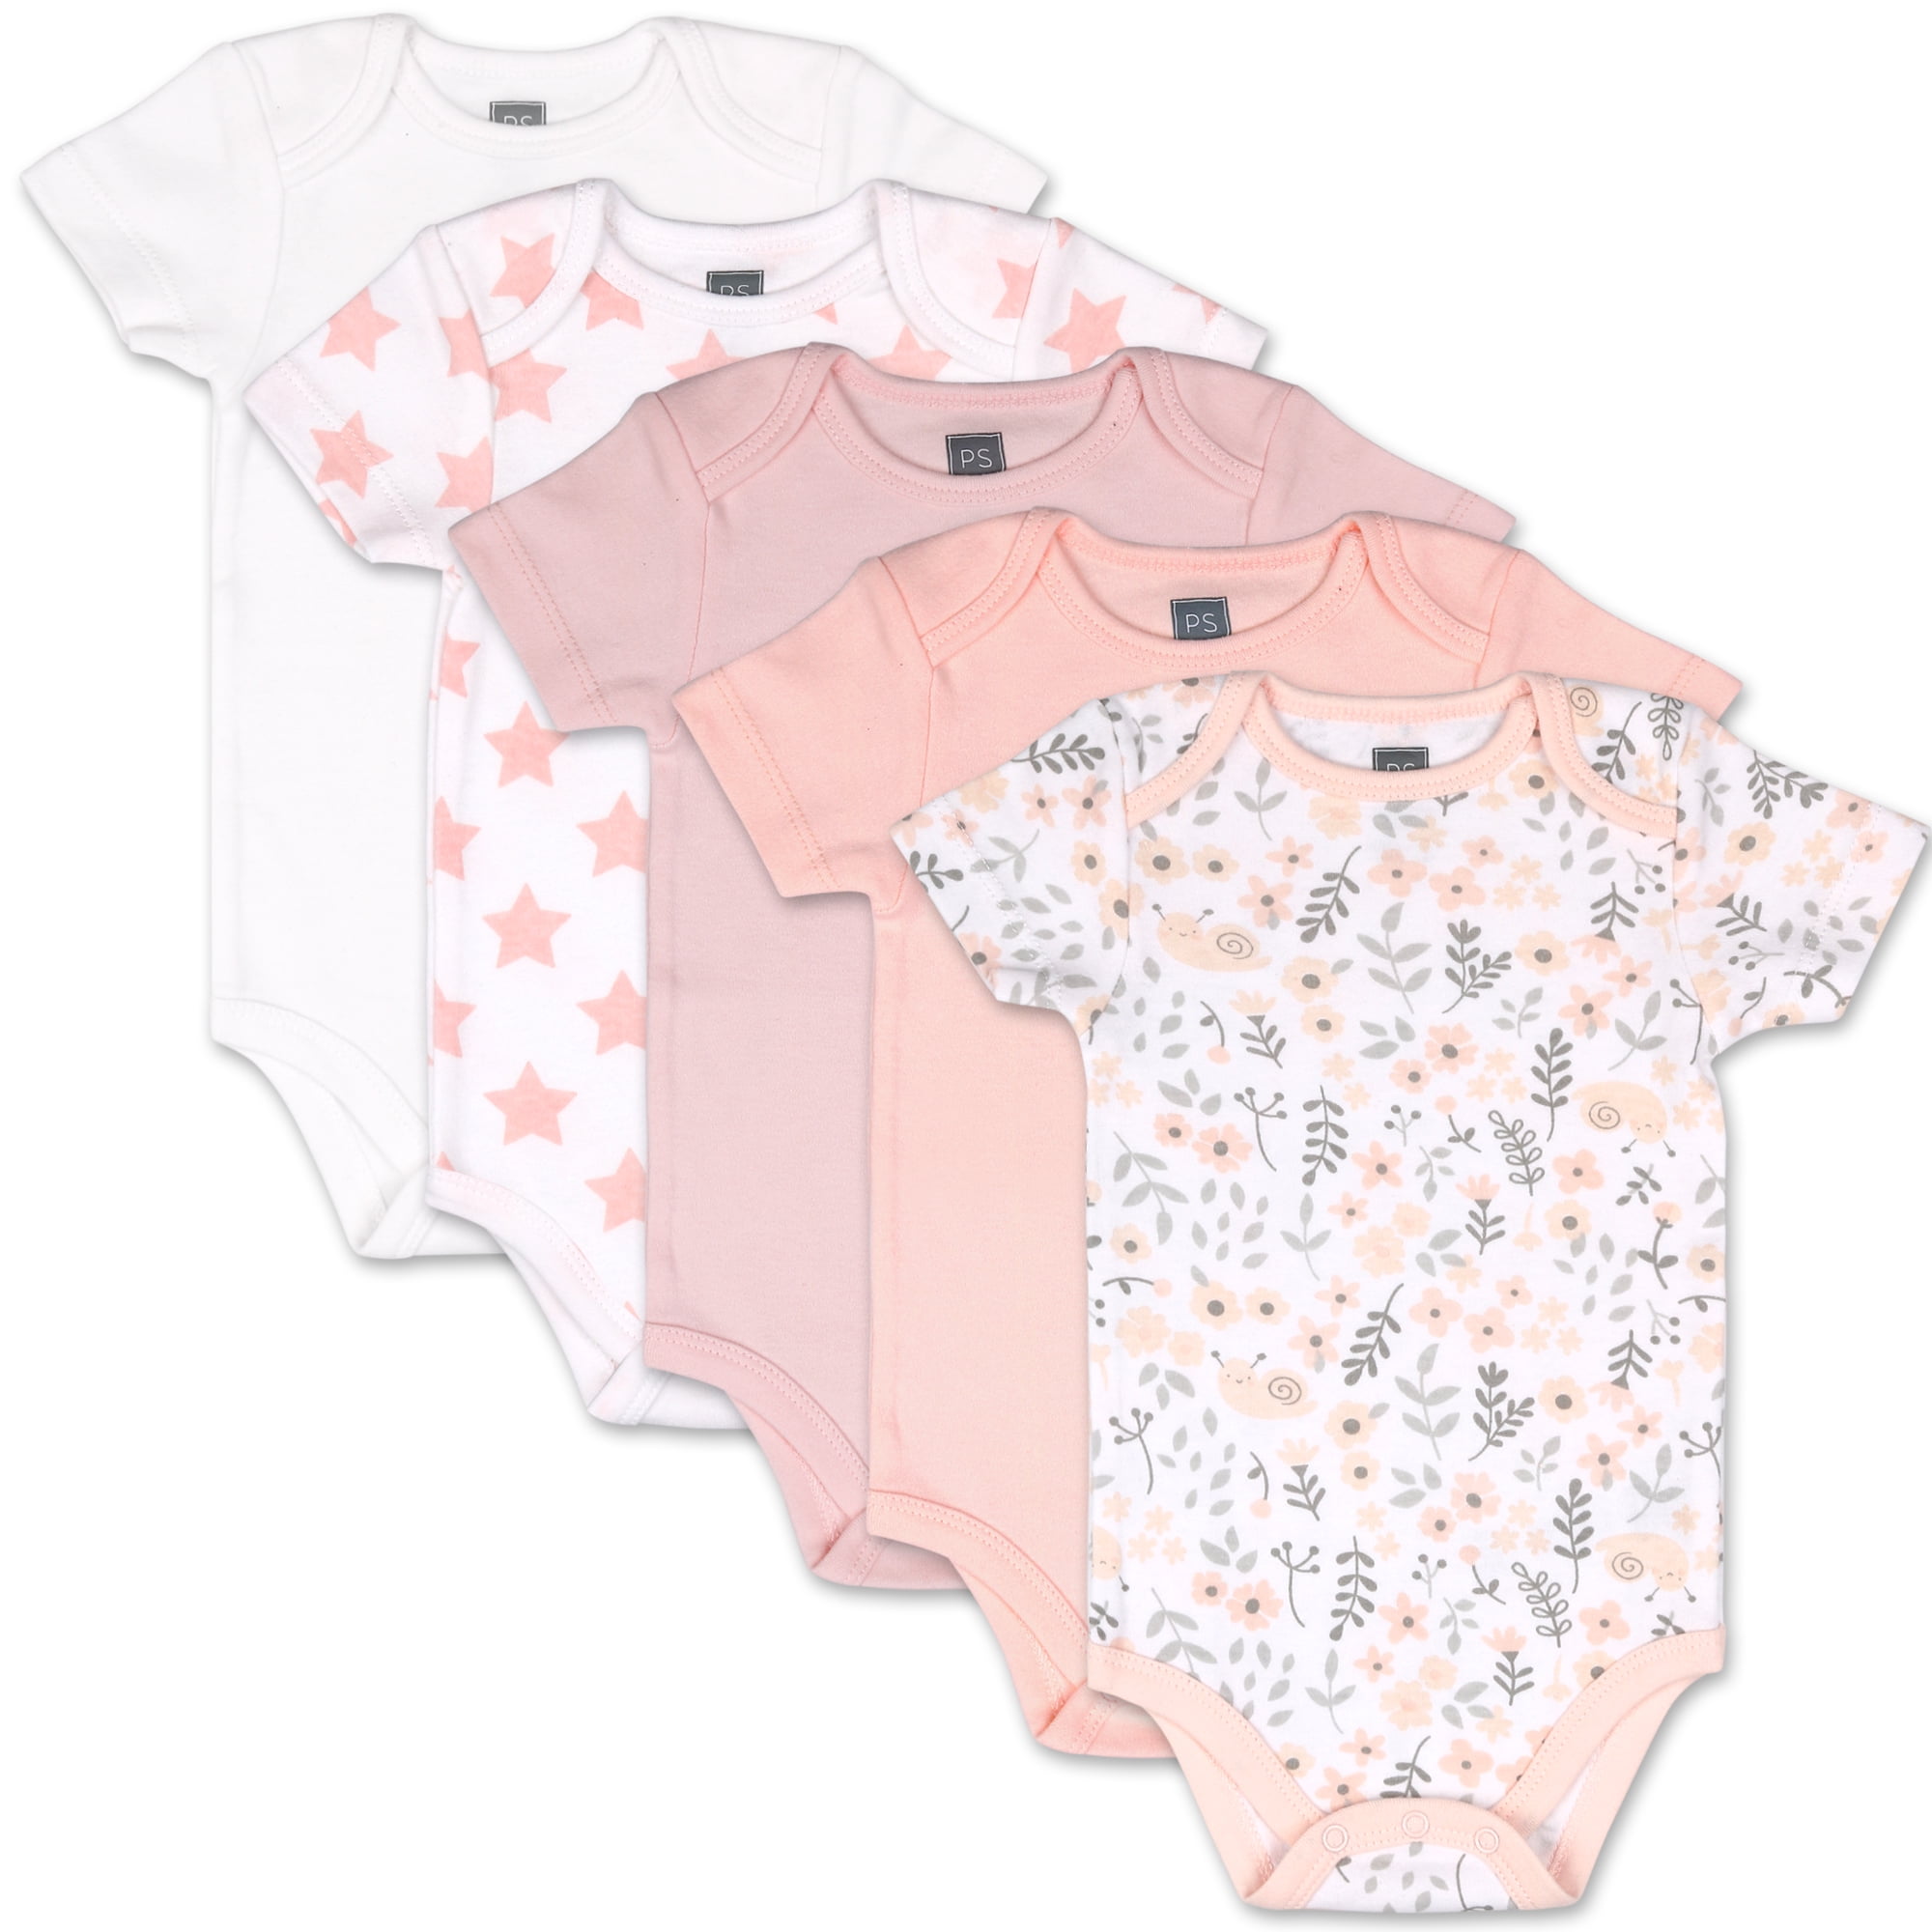 Baby Girls Summer Bodysuits LAURA ASHLEY 3 Pack Pink Floral Cotton Frilly Vests